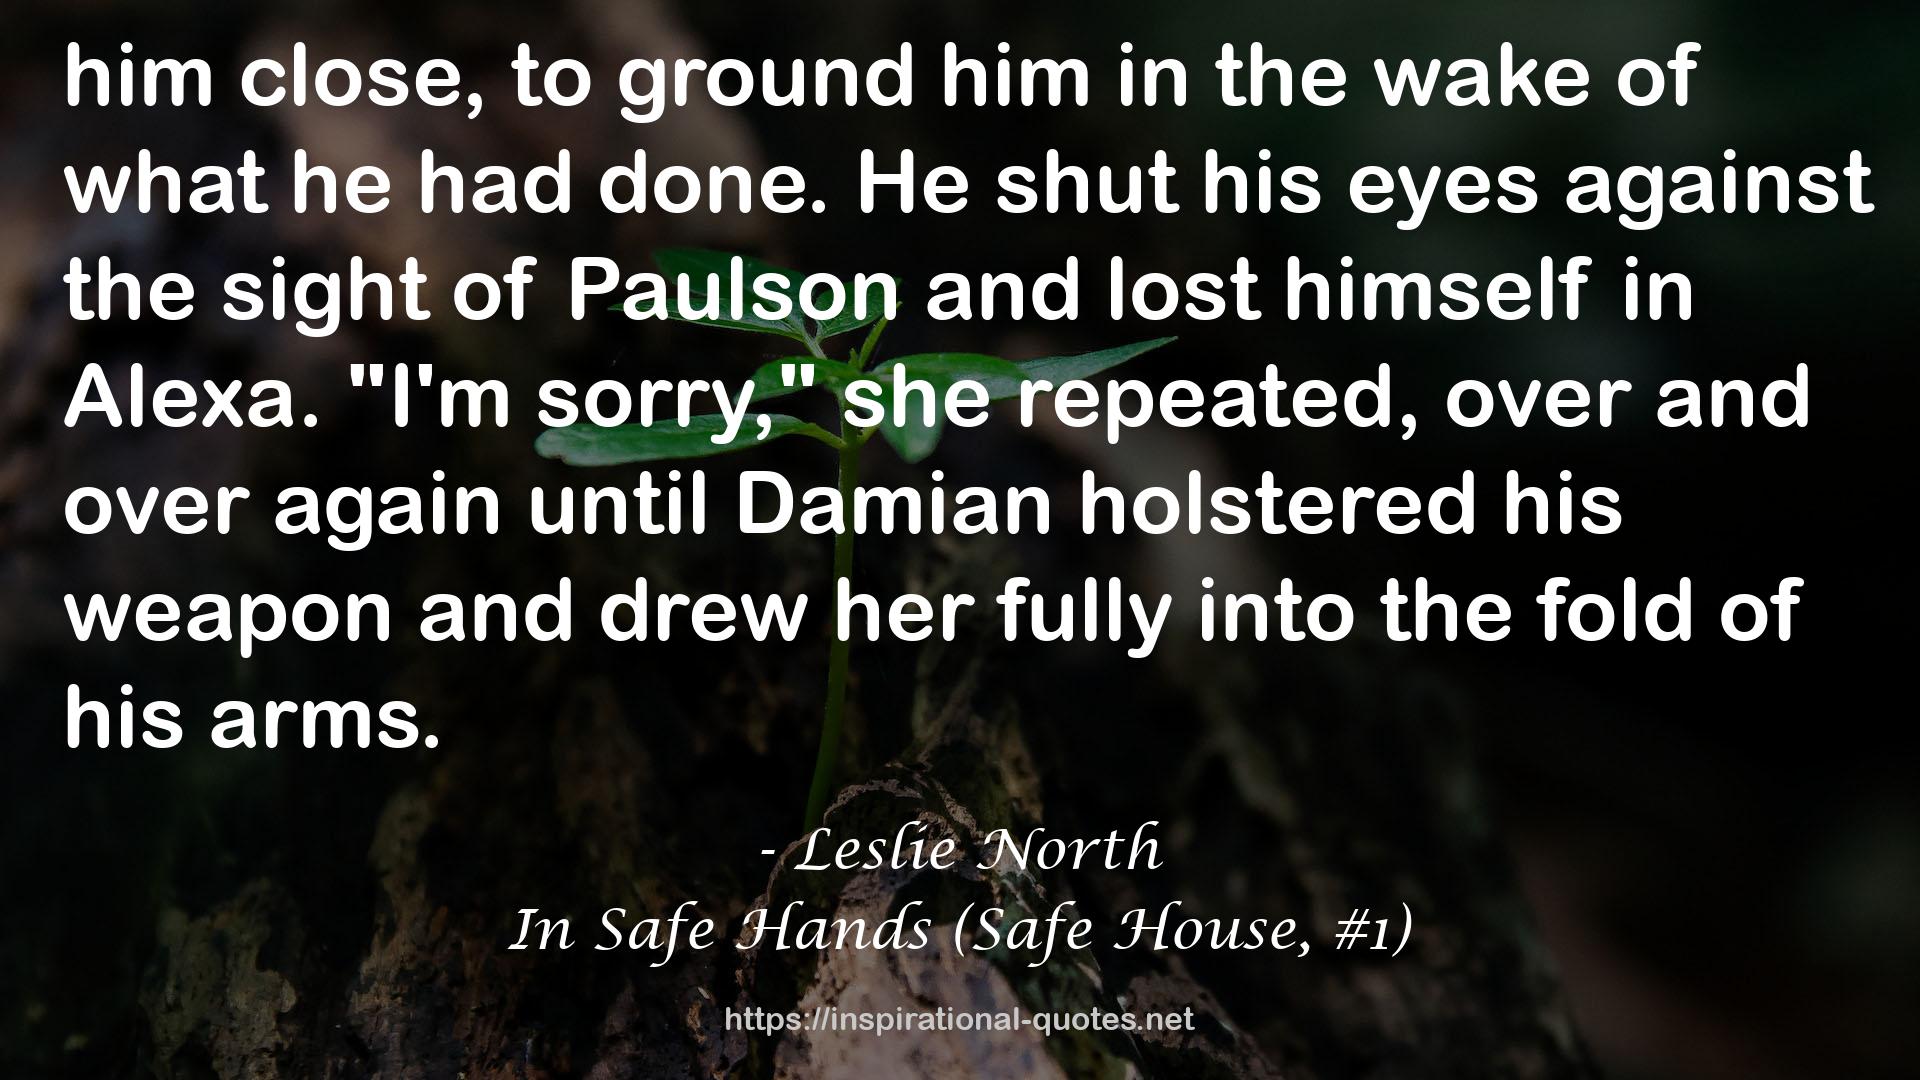 In Safe Hands (Safe House, #1) QUOTES